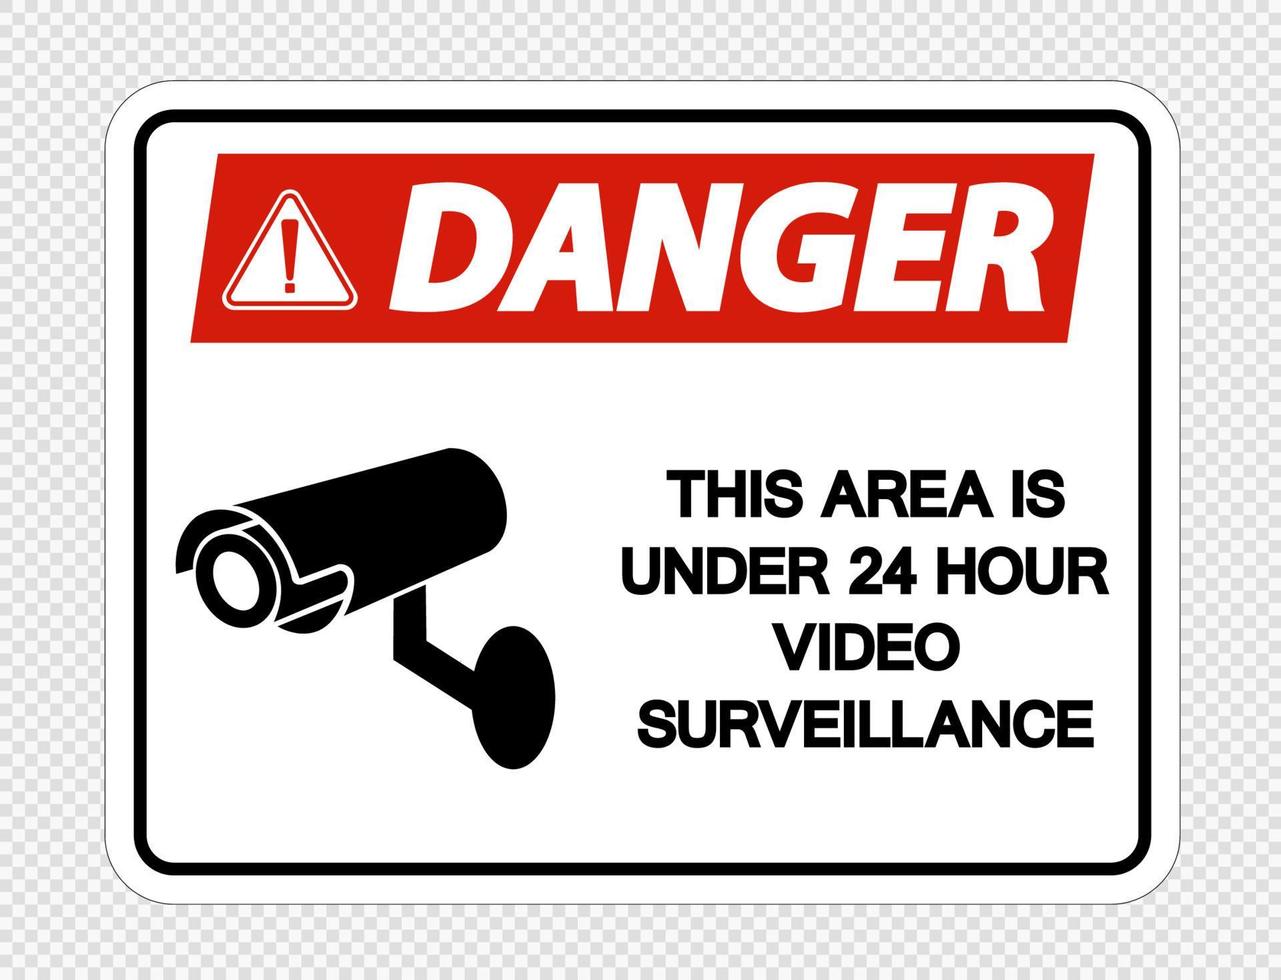 Danger This Area is Under 24 Hour Video Surveillance Sign on transparent background vector